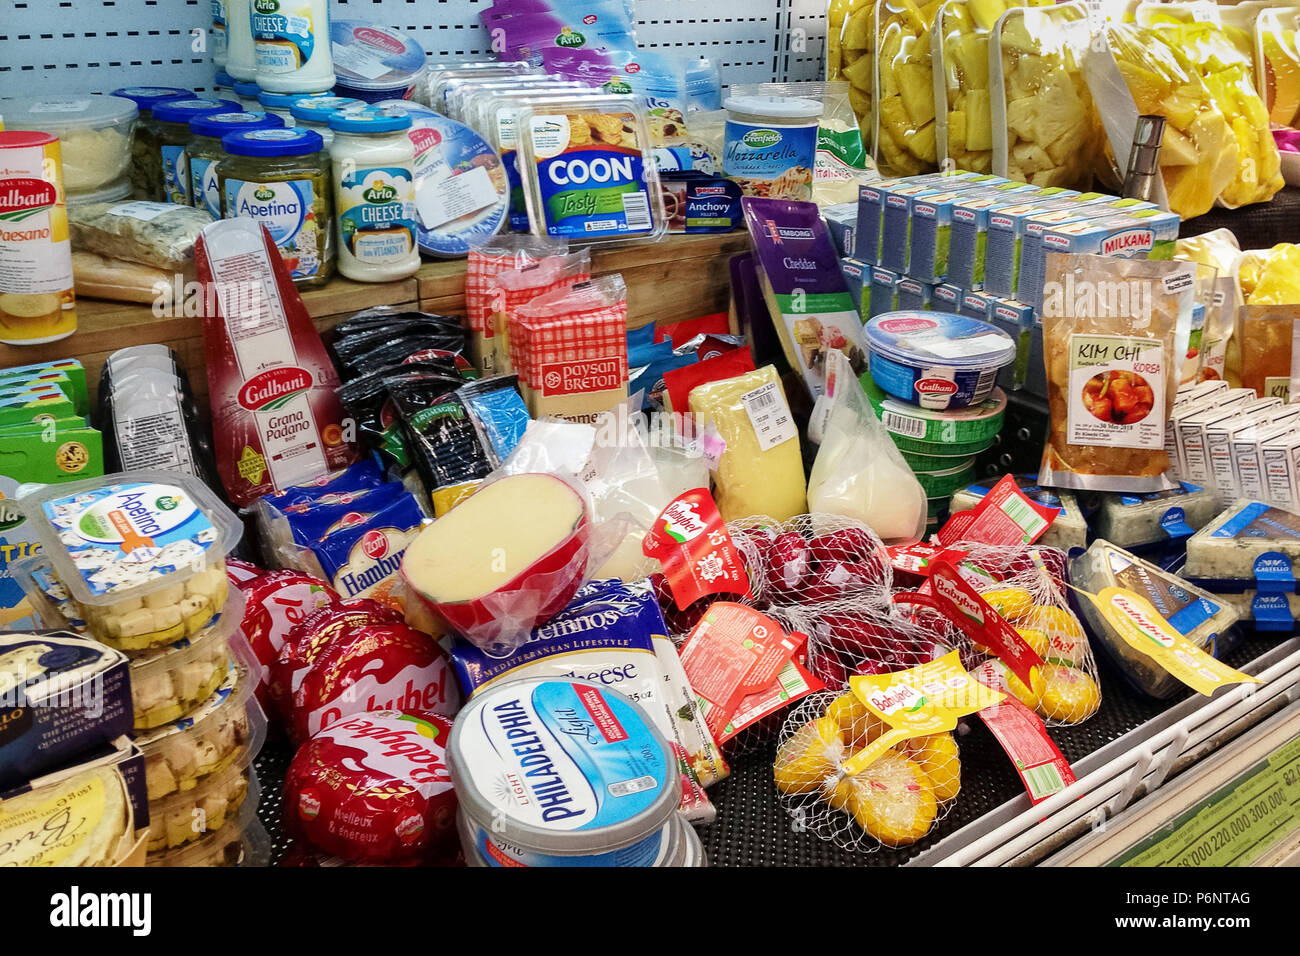 Bali, Jimbaran, 2018-04-28: Shelf in grocery store with huge selection of various delicacies cheeses in different packages, shapes, types. Stock Photo